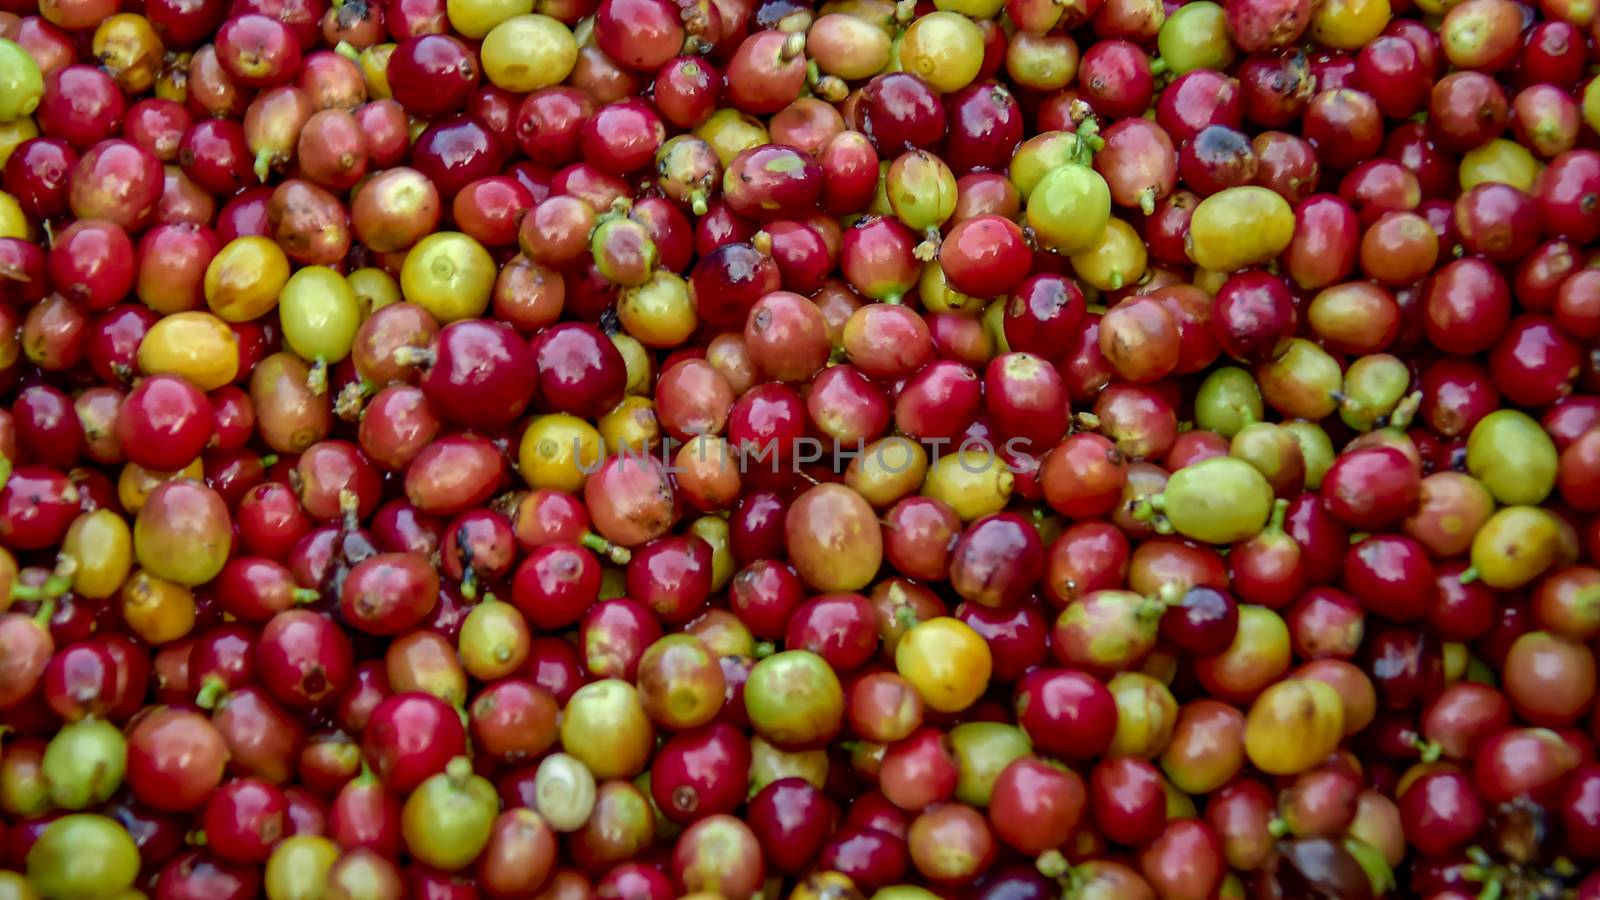 Raw coffee beans background, Close up fresh organic red raw and ripe coffee cherry beans.